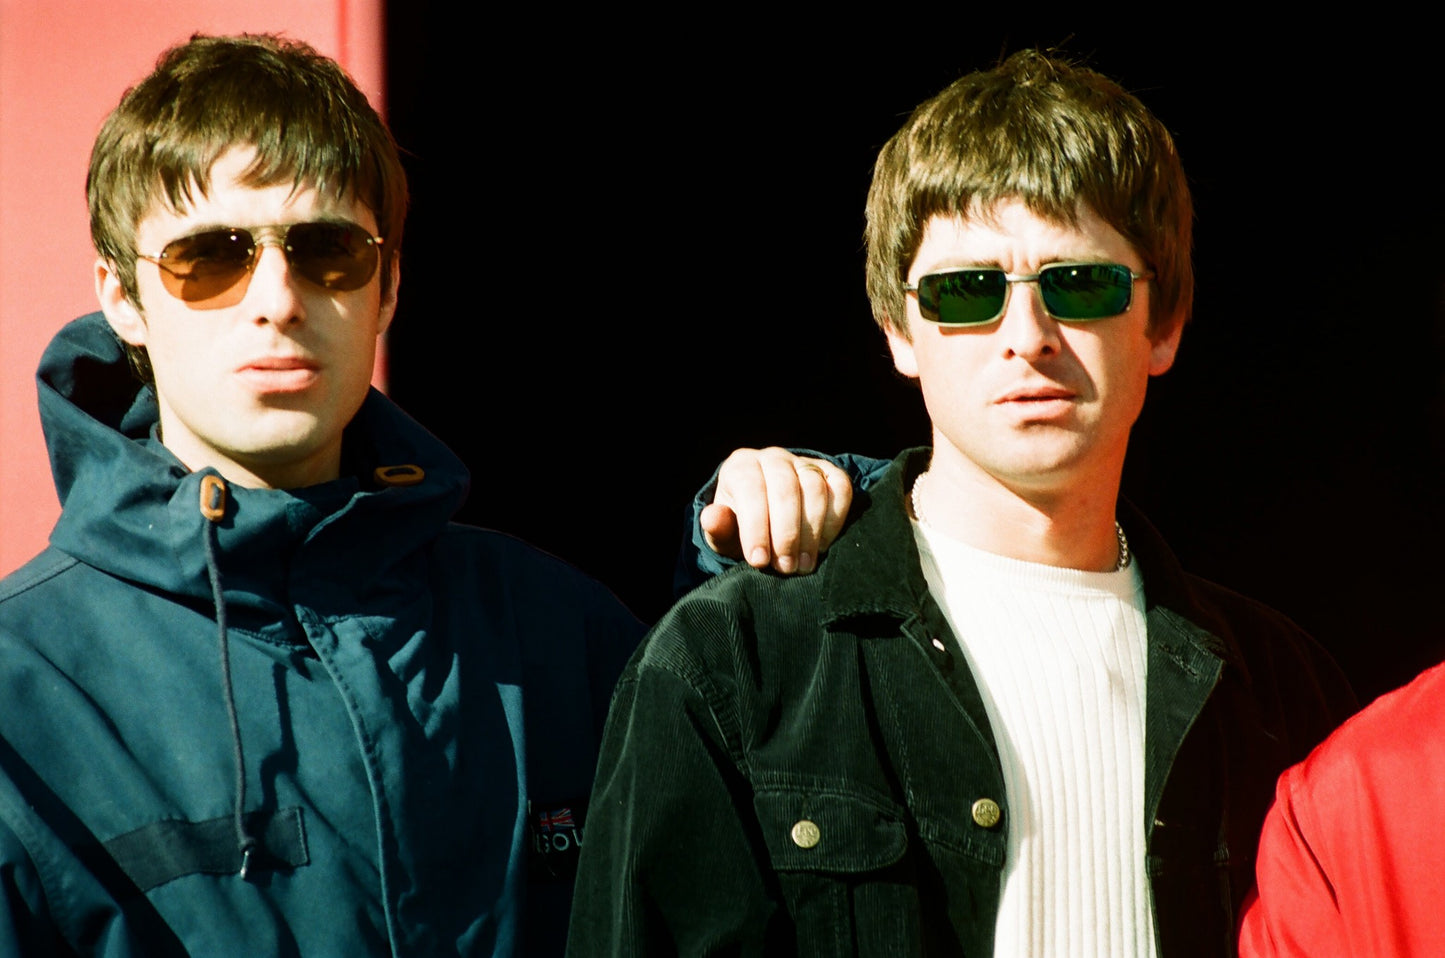 Oasis - Liam and Noel Gallagher in Newcastle, England, 1997 Poster